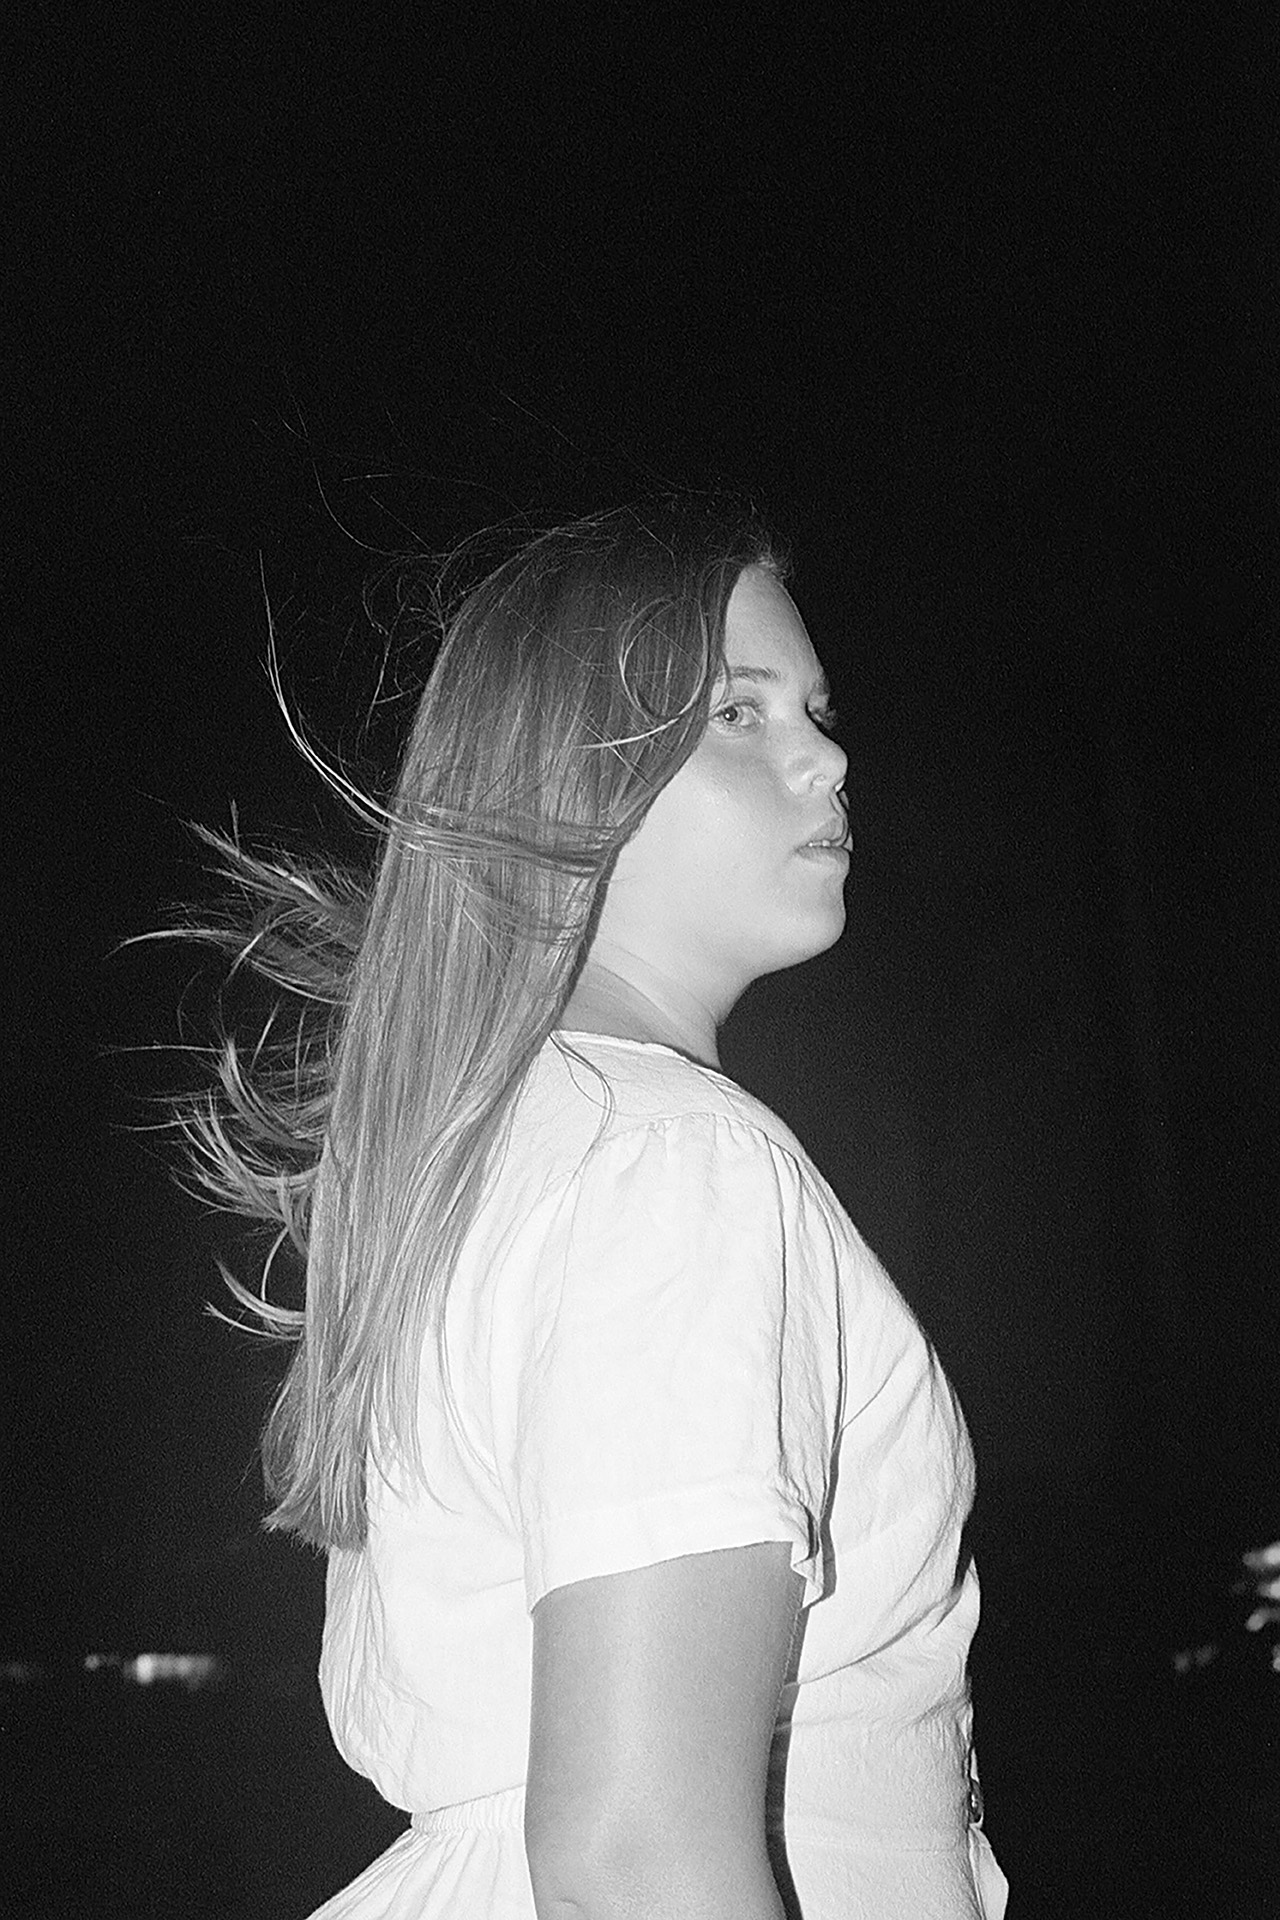 A black and white image of Eden in the middle of the frame, surrounded by a dark sky. Her hair is blowing in the wind, and she gazes off past the camera lens.